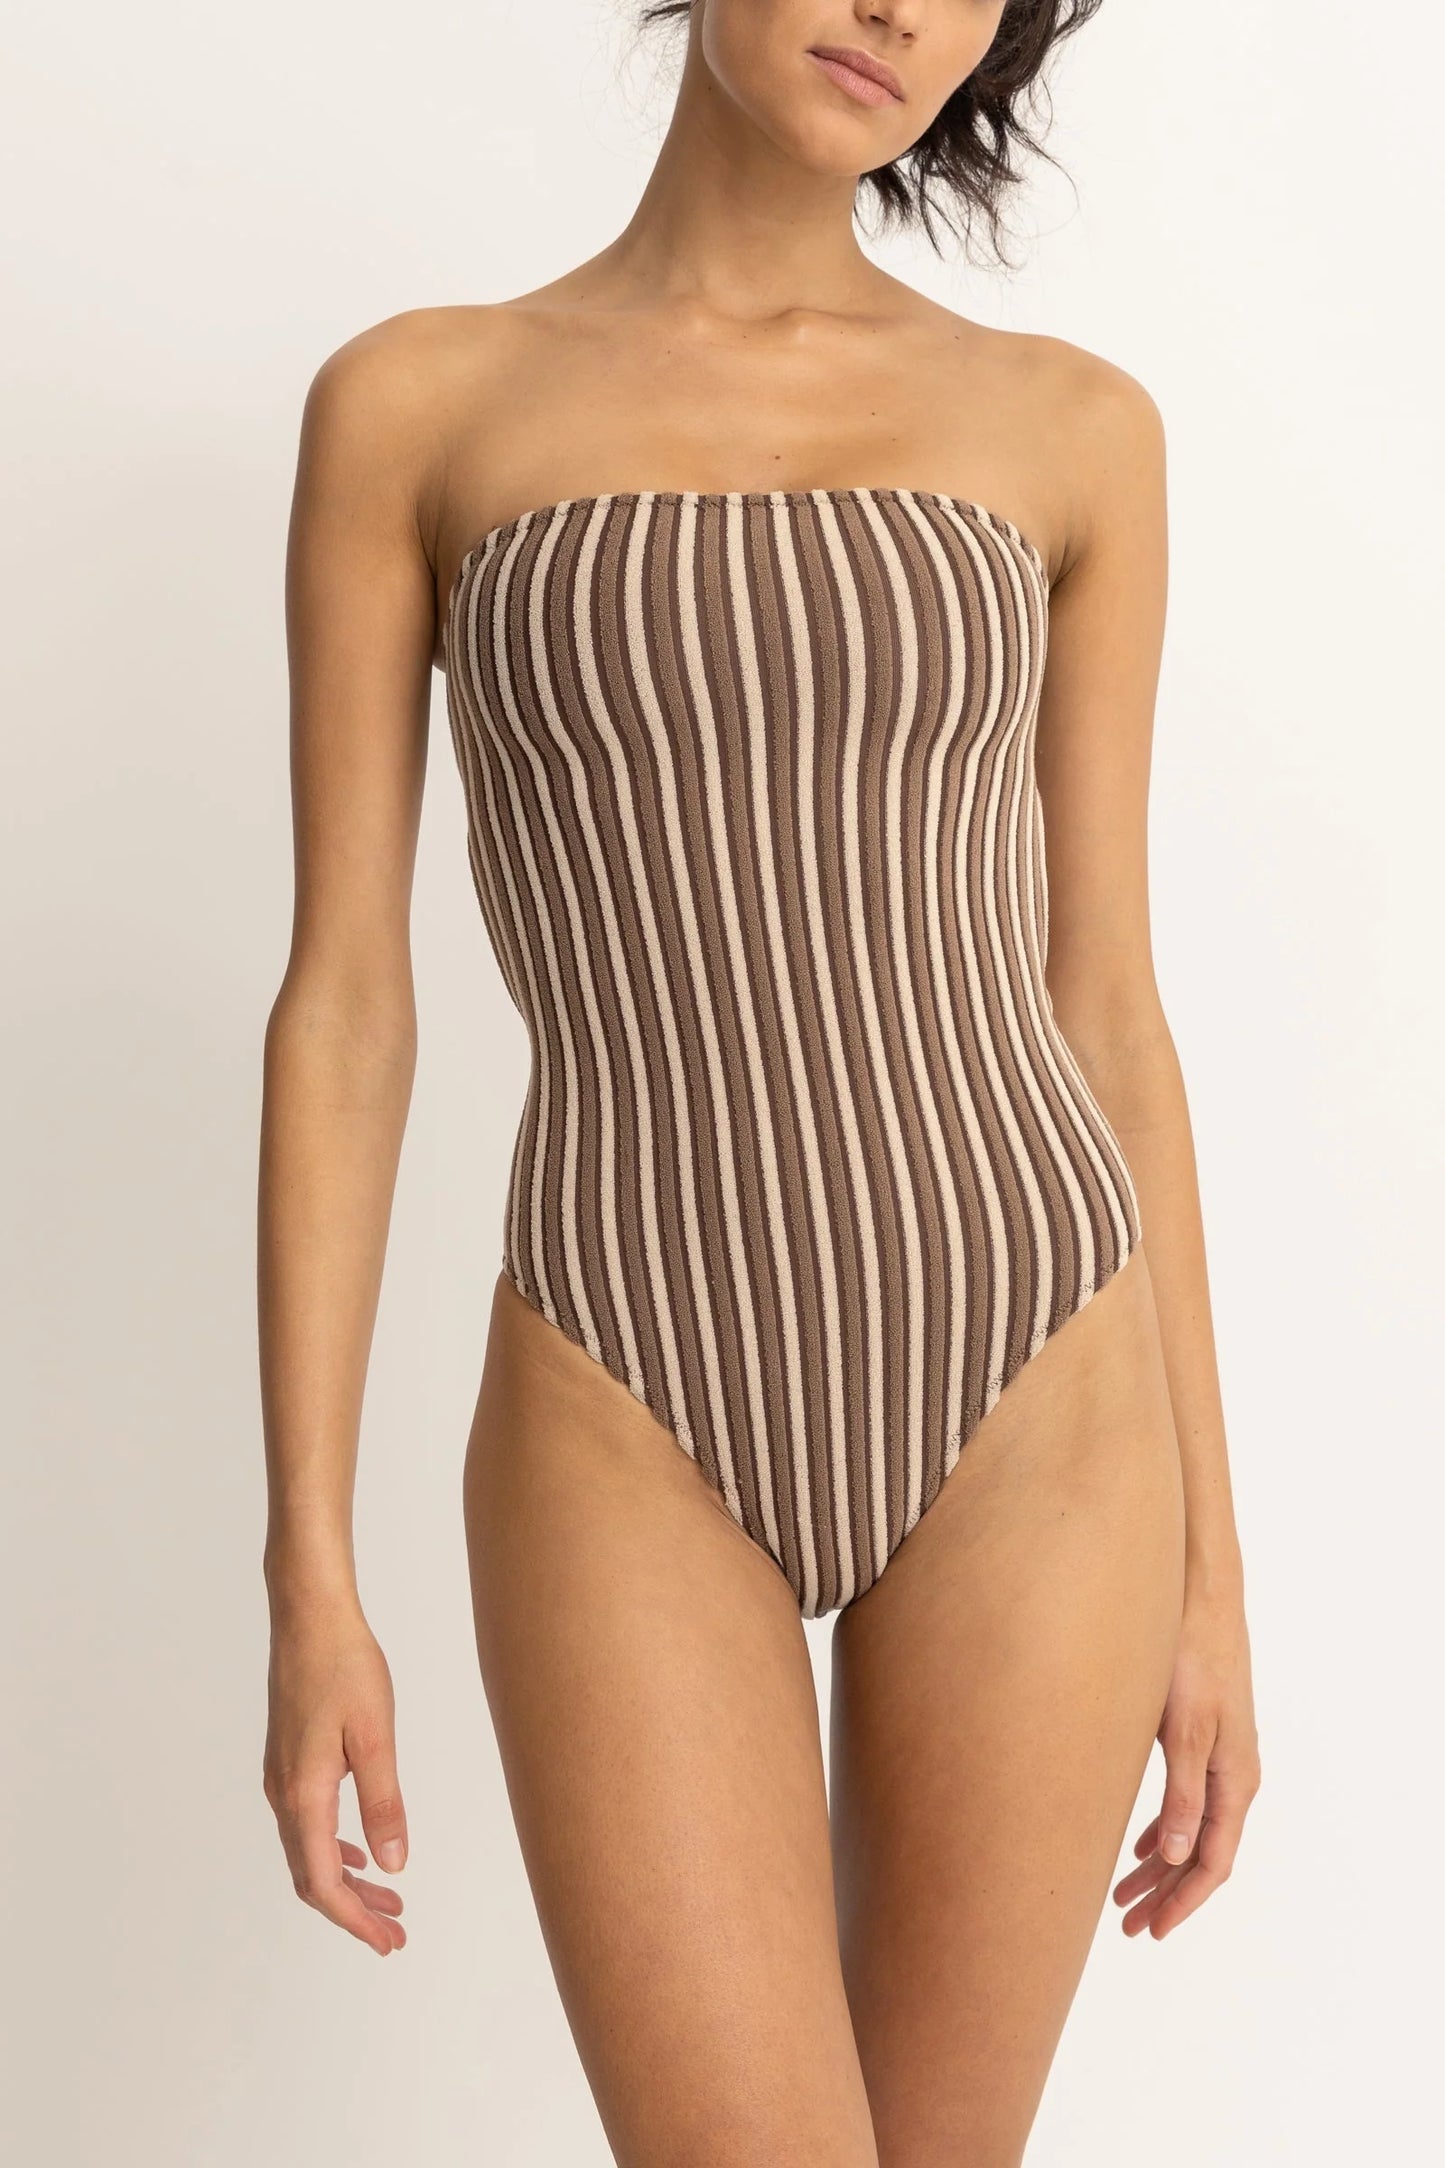 TERRY SANDS strapless one piece